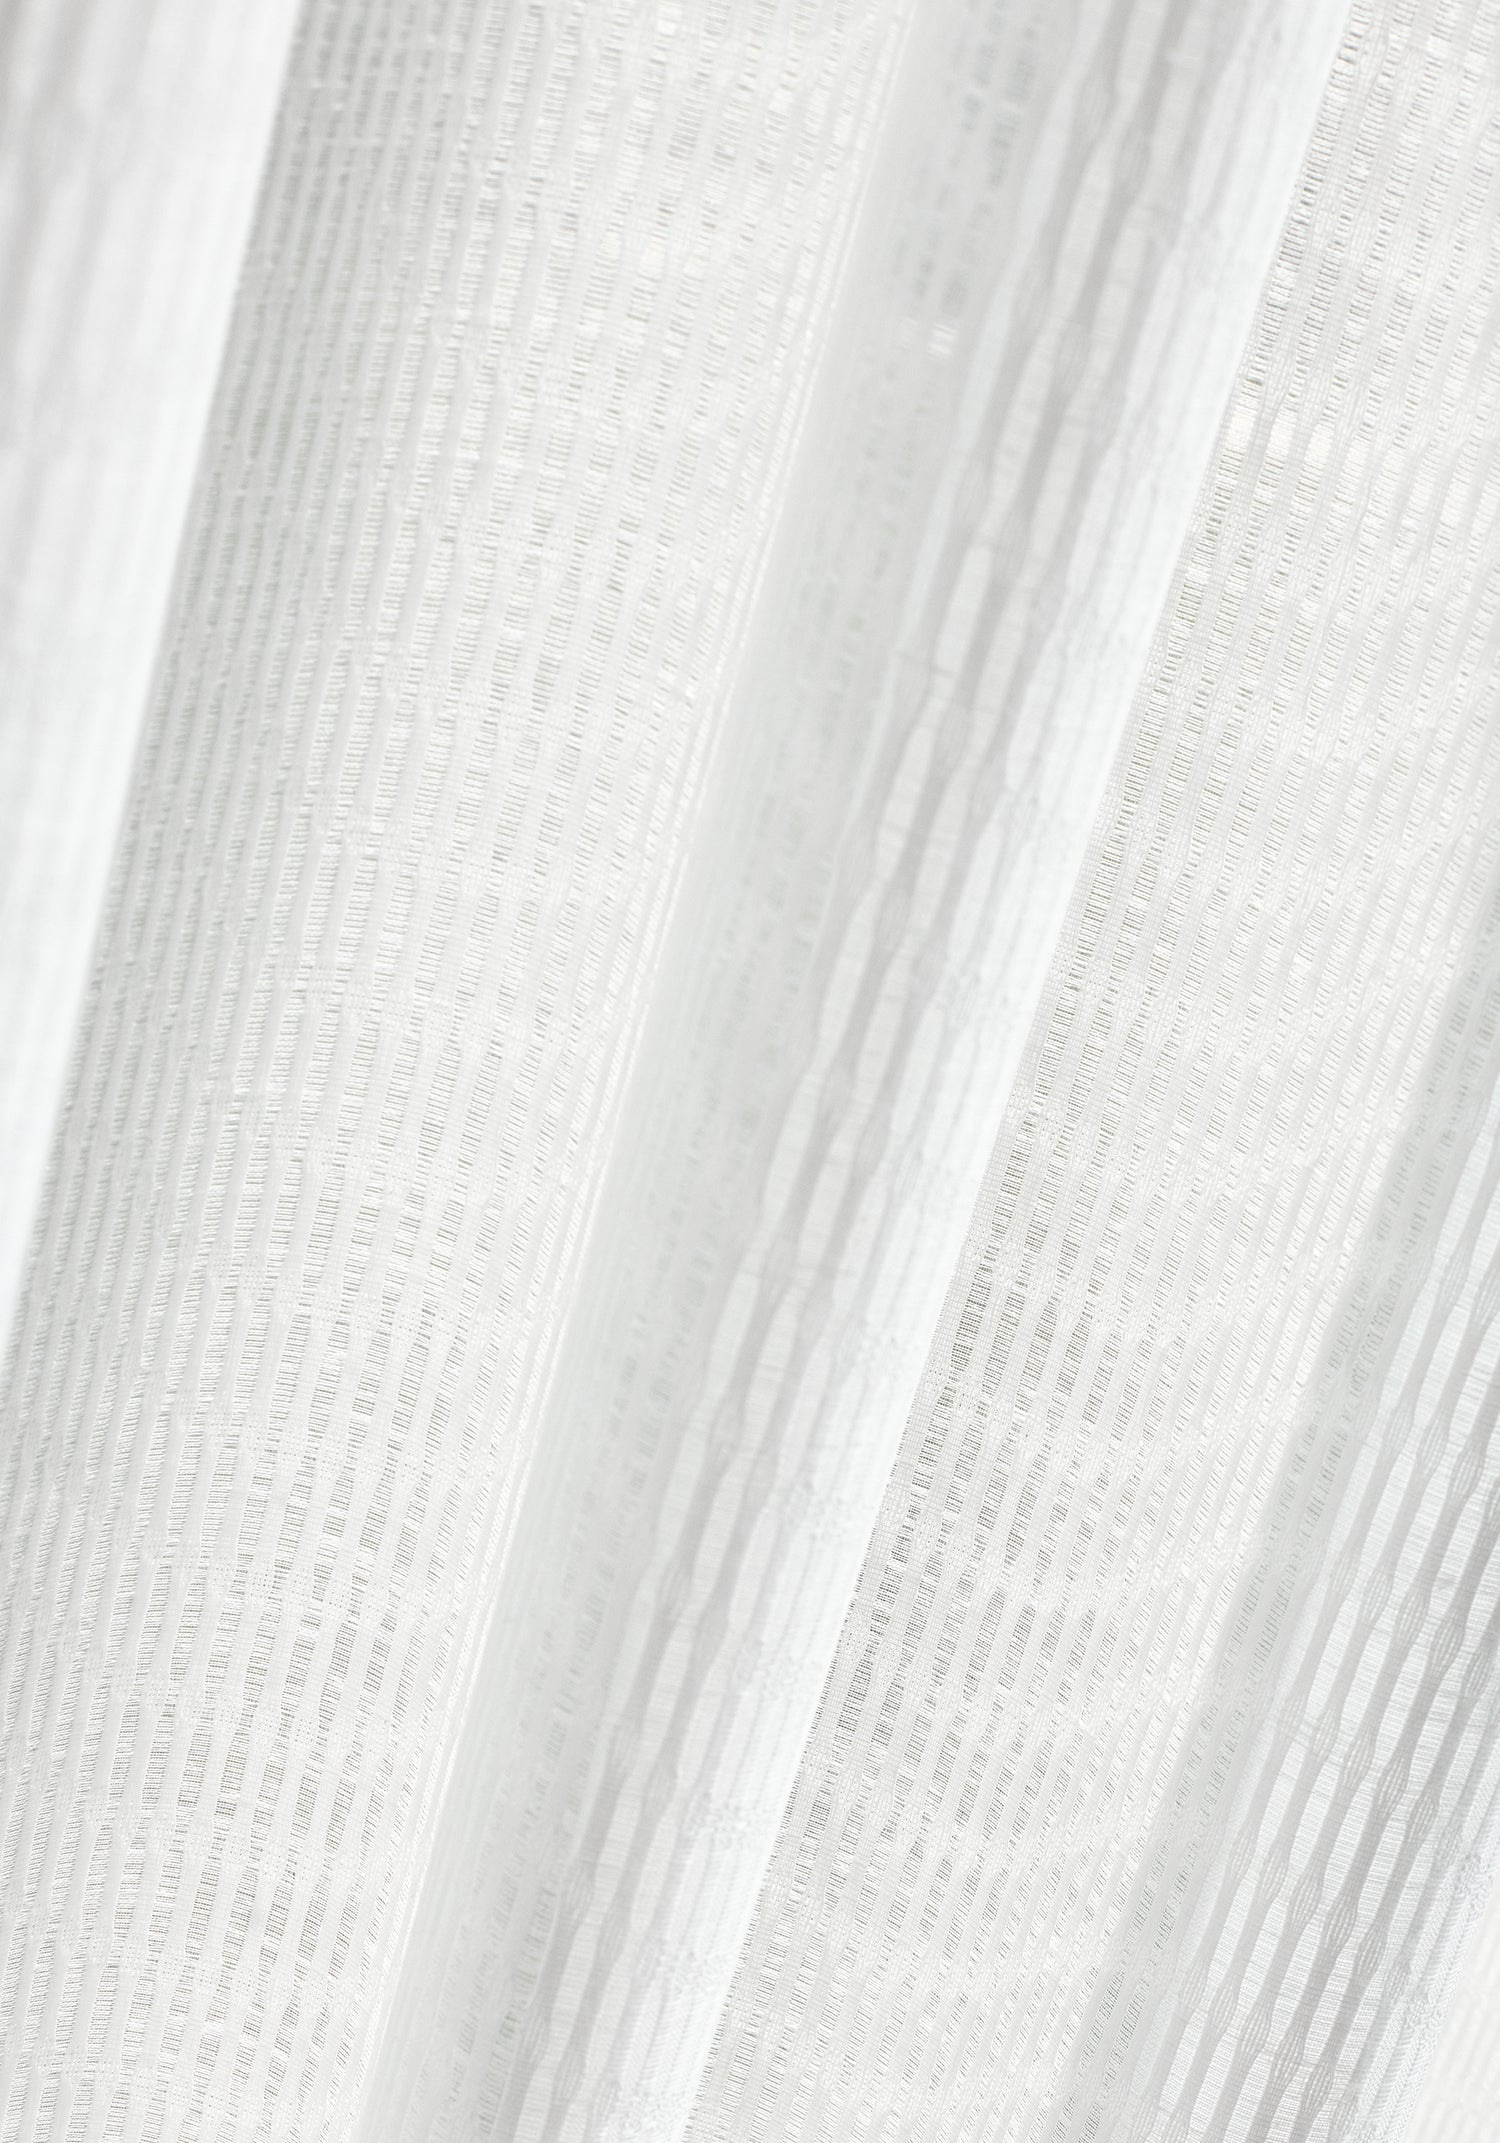 Up close sheer in Bellamy fabric in snow white color - pattern number FWW8231 - by Thibaut in the Aura collection